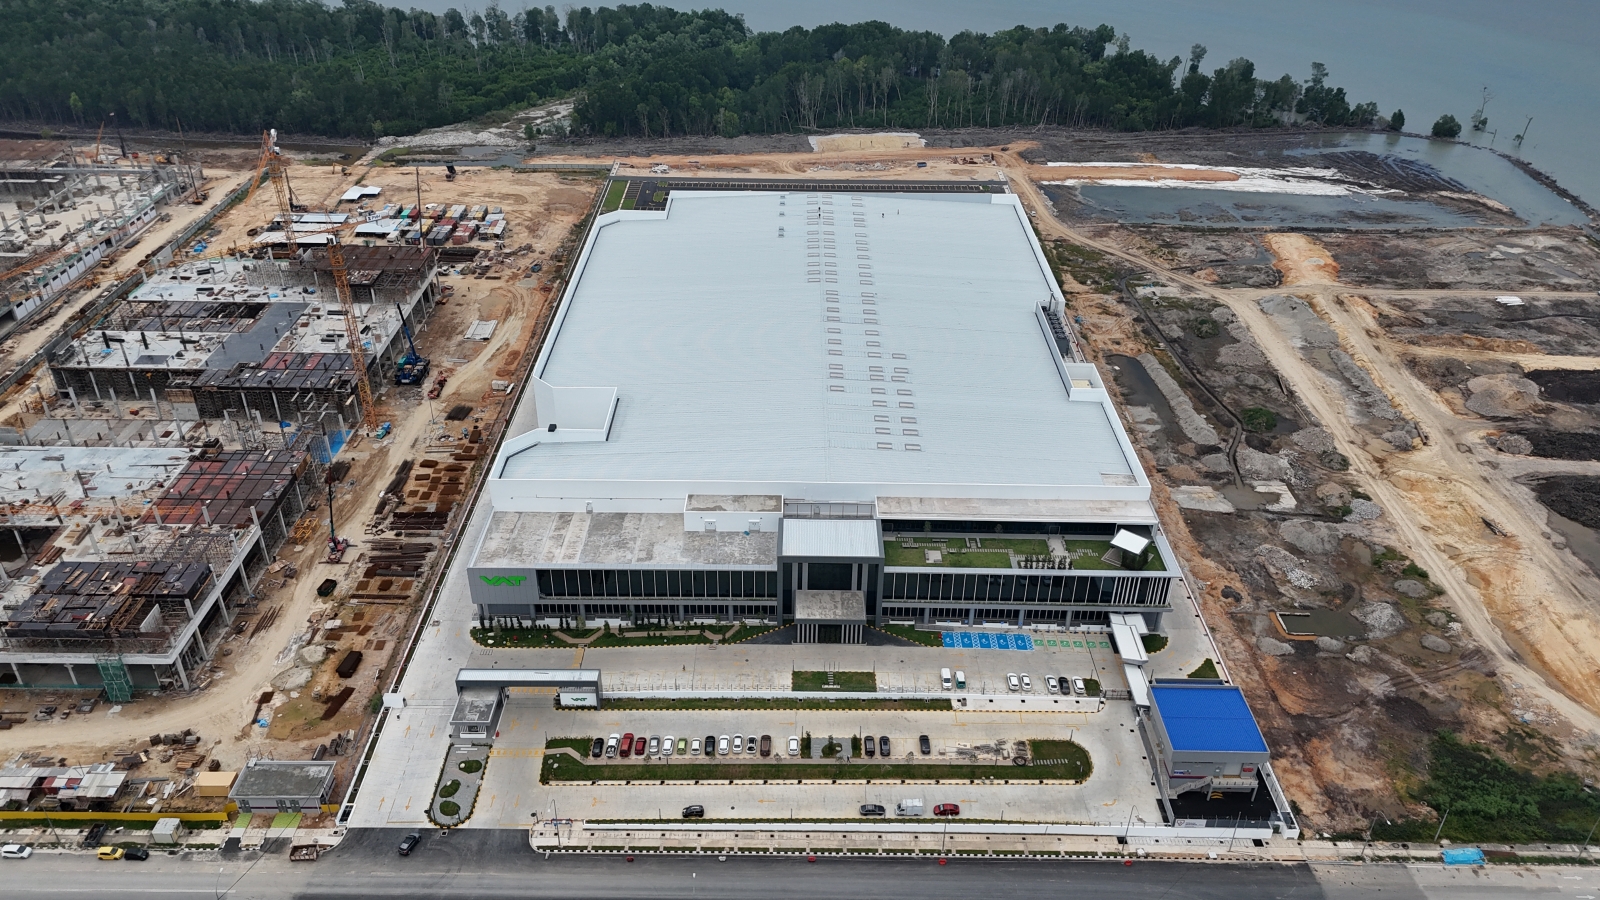 View of rooftop of VAT Manufacturing Malaysia's facilities in Penang, Malaysia where 1.5 MWp rooftop solar array to be installed.